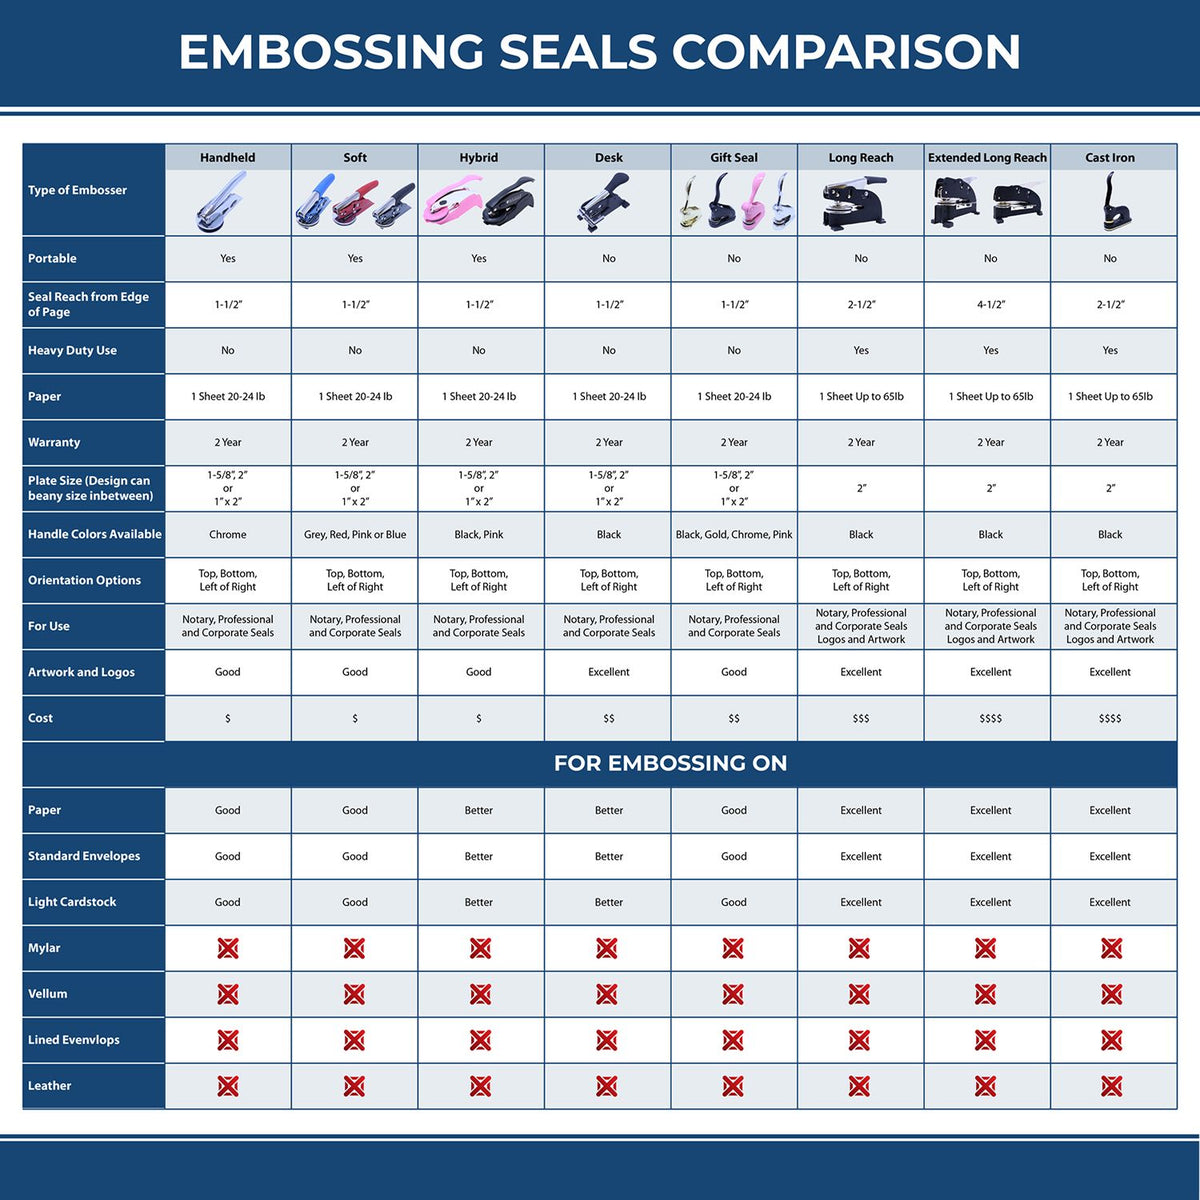 A comparison chart for the different types of mount models available for the Hybrid Rhode Island Architect Seal